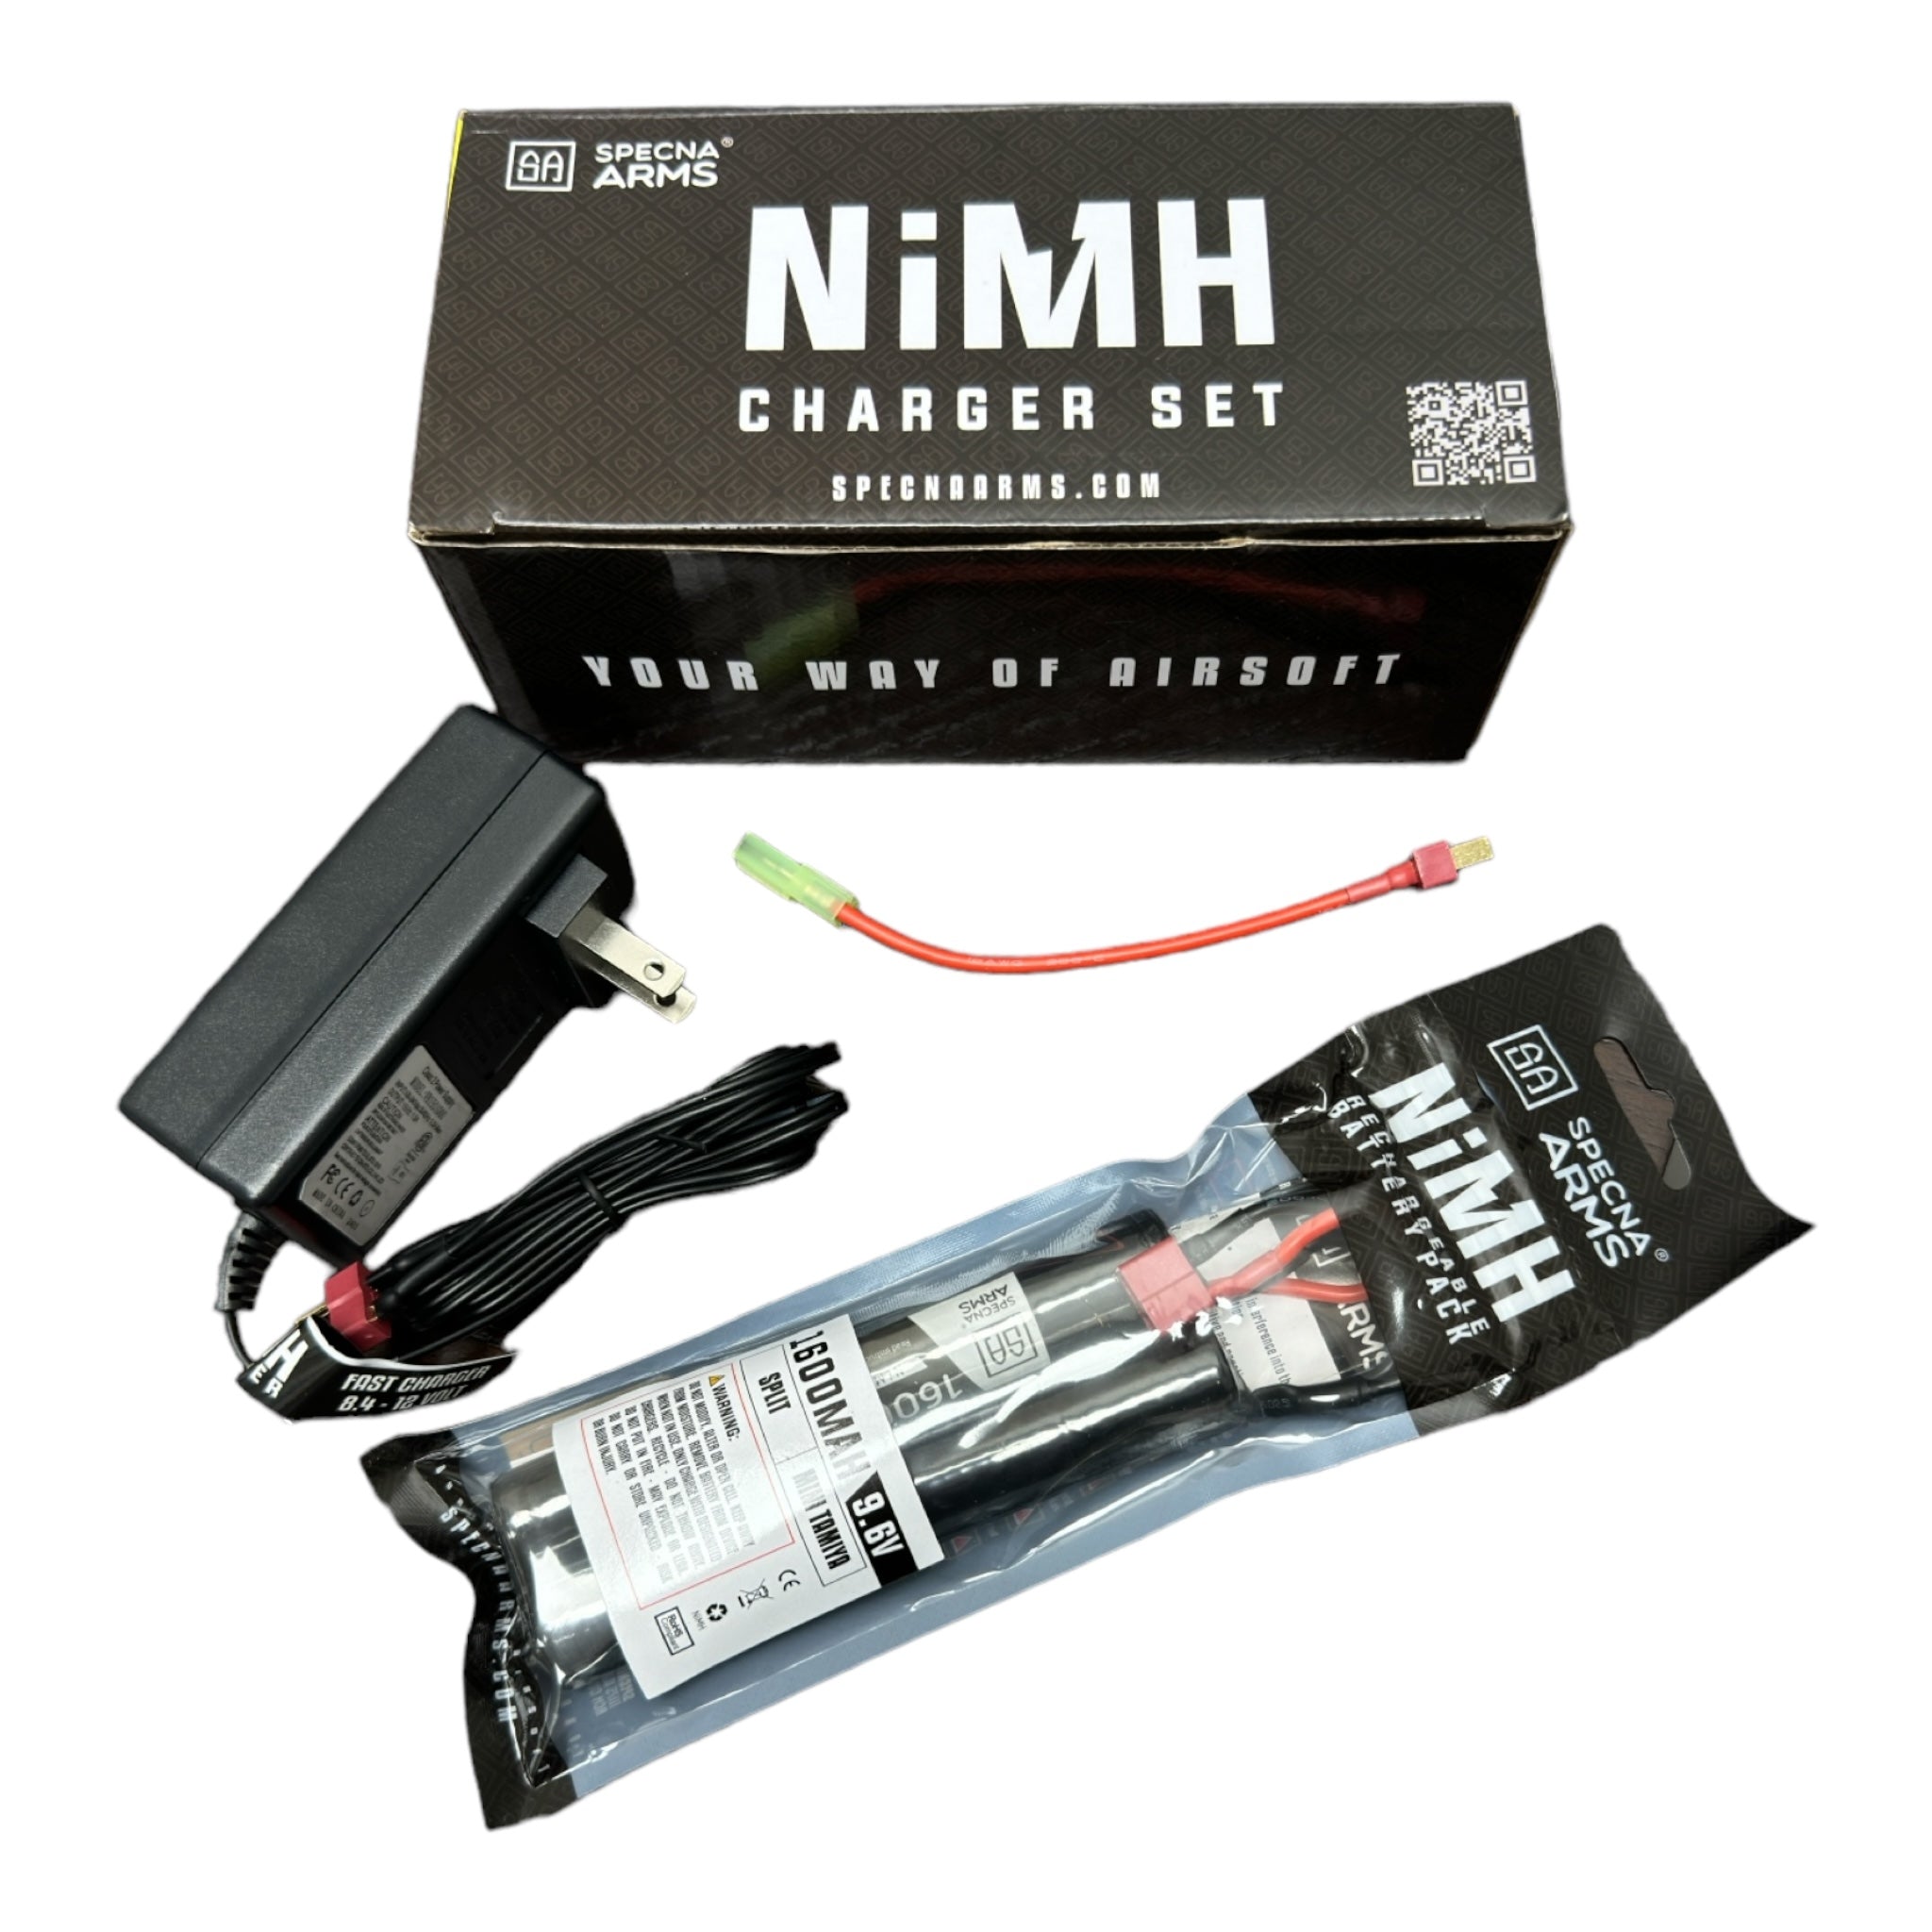 Specna Arms EASY Charger + NiMh 9.6 V 1600 mAh battery KIT - ssairsoft.com